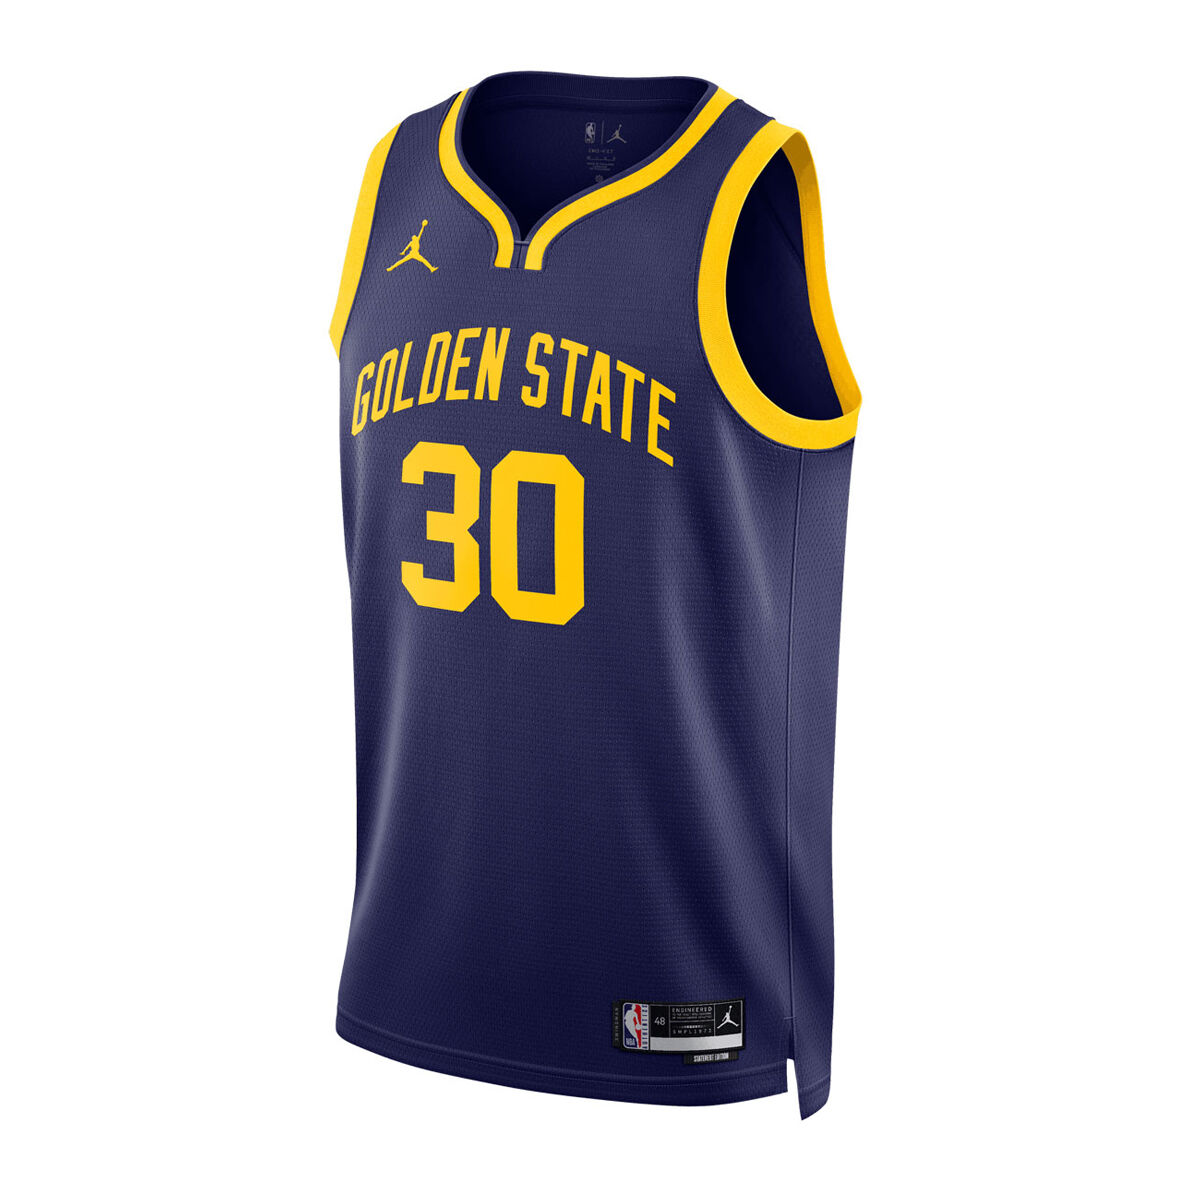 Nike Kids' Golden State Warriors Steph Curry #30 2022 City Edition Jersey